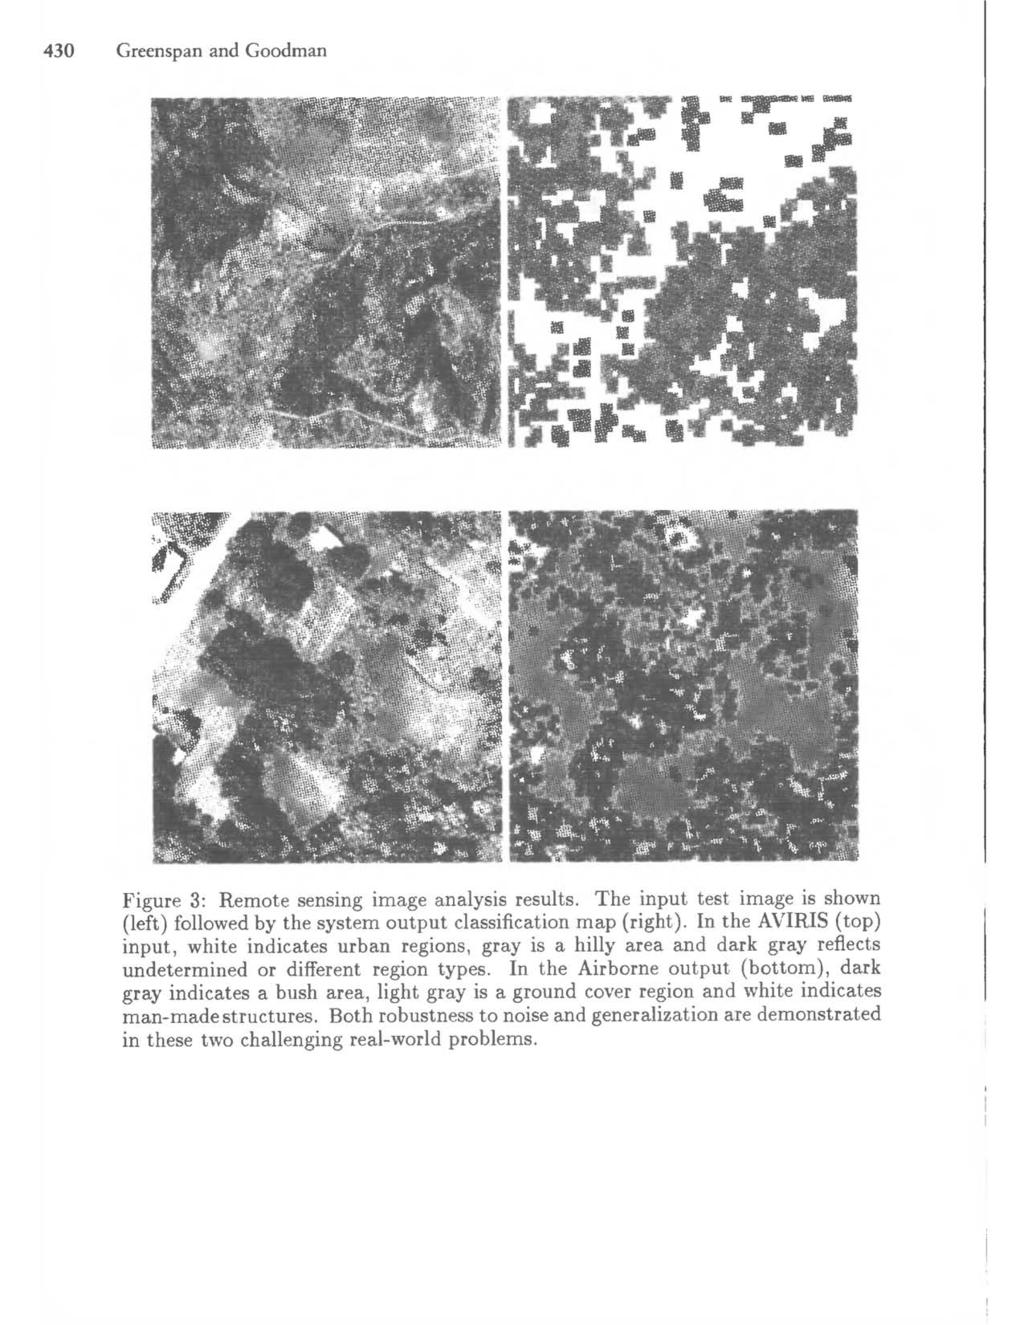 430 Greenspan and Goodman Figure 3: Remote sensing image analysis results. The input test image is shown (left) followed by the system output classification map (right).